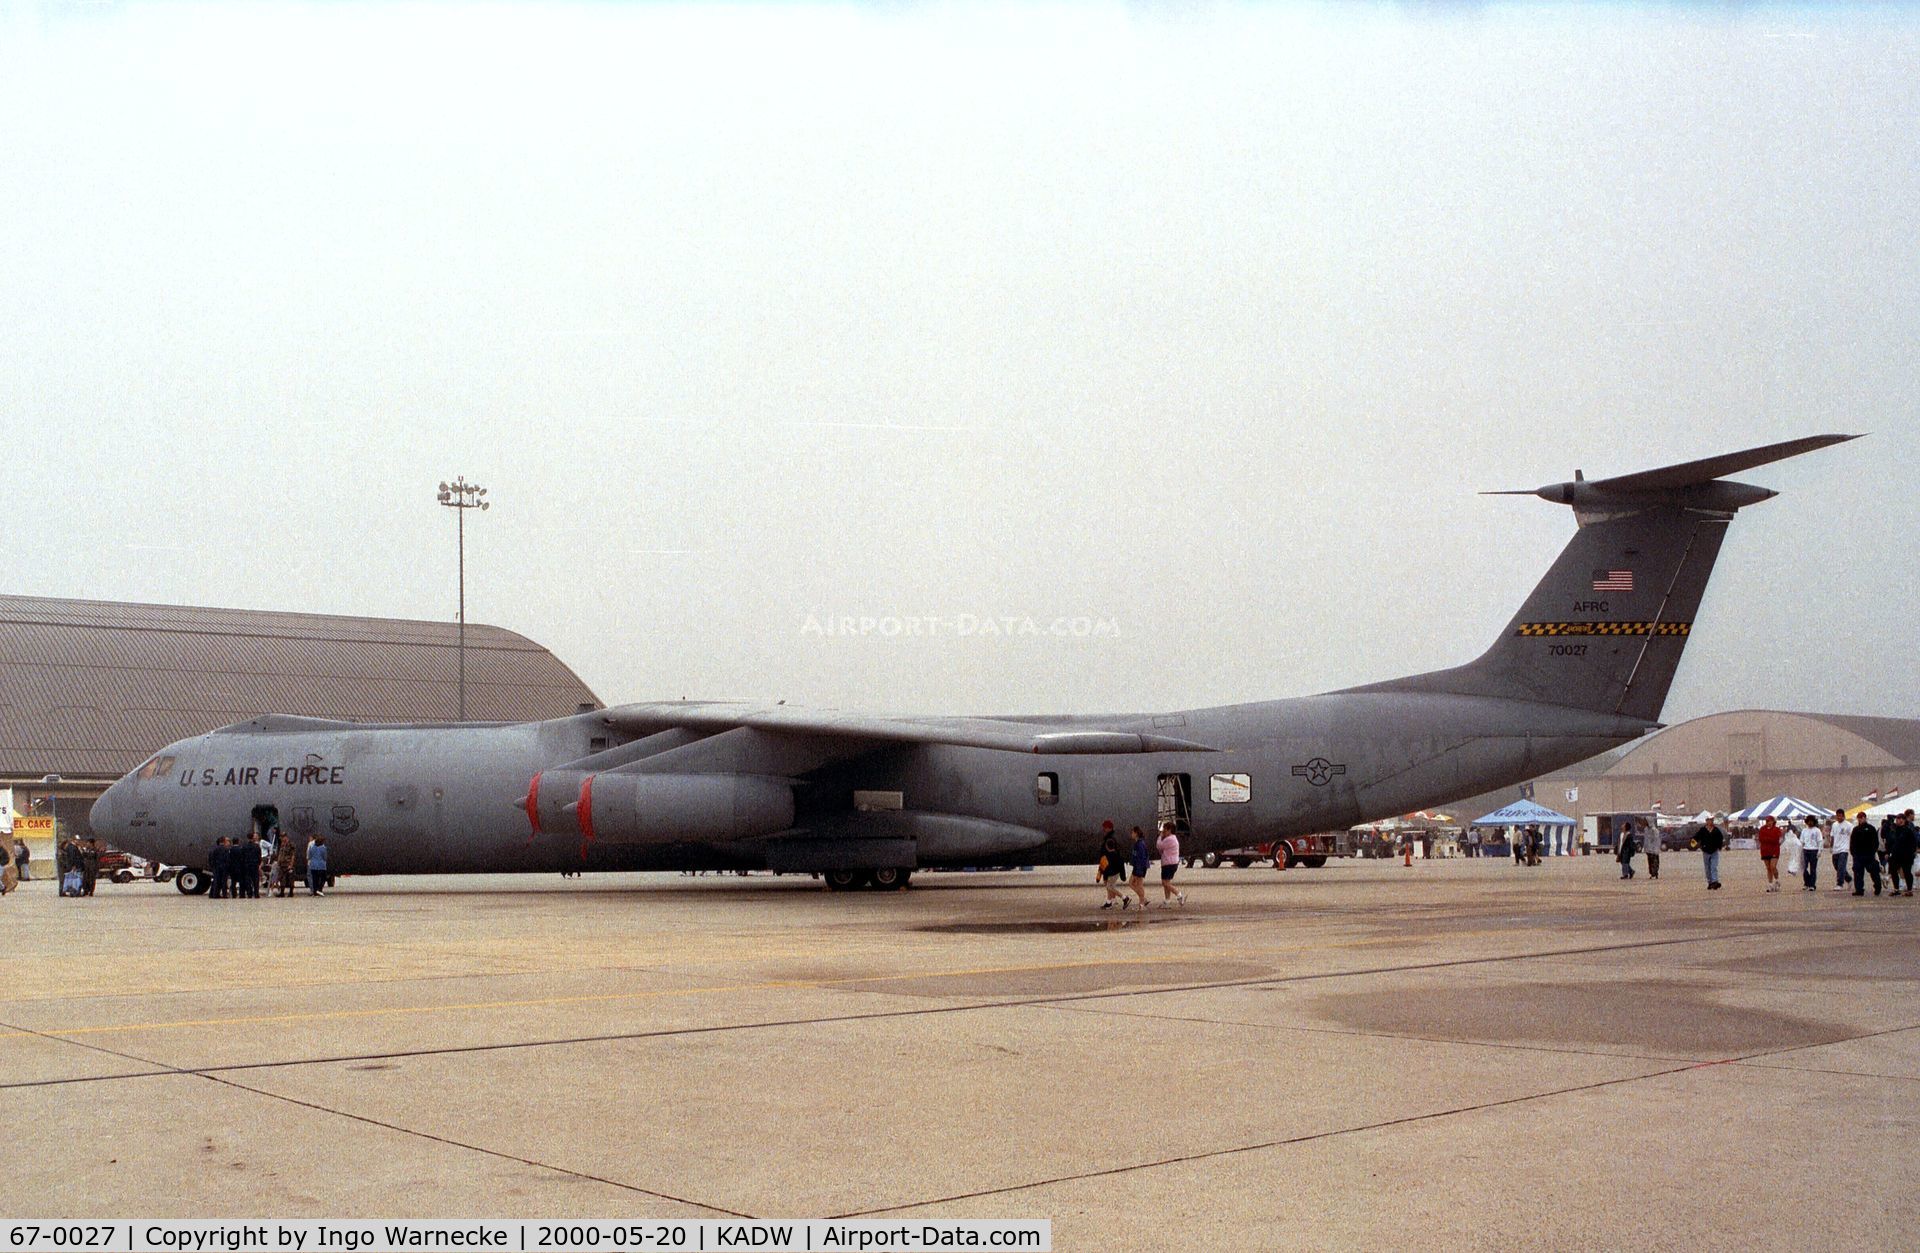 67-0027, 1967 Lockheed C-141C Starlifter C/N 300-6278, Lockheed C-141C Starlifter of the USAF at Andrews AFB during Armed Forces Day